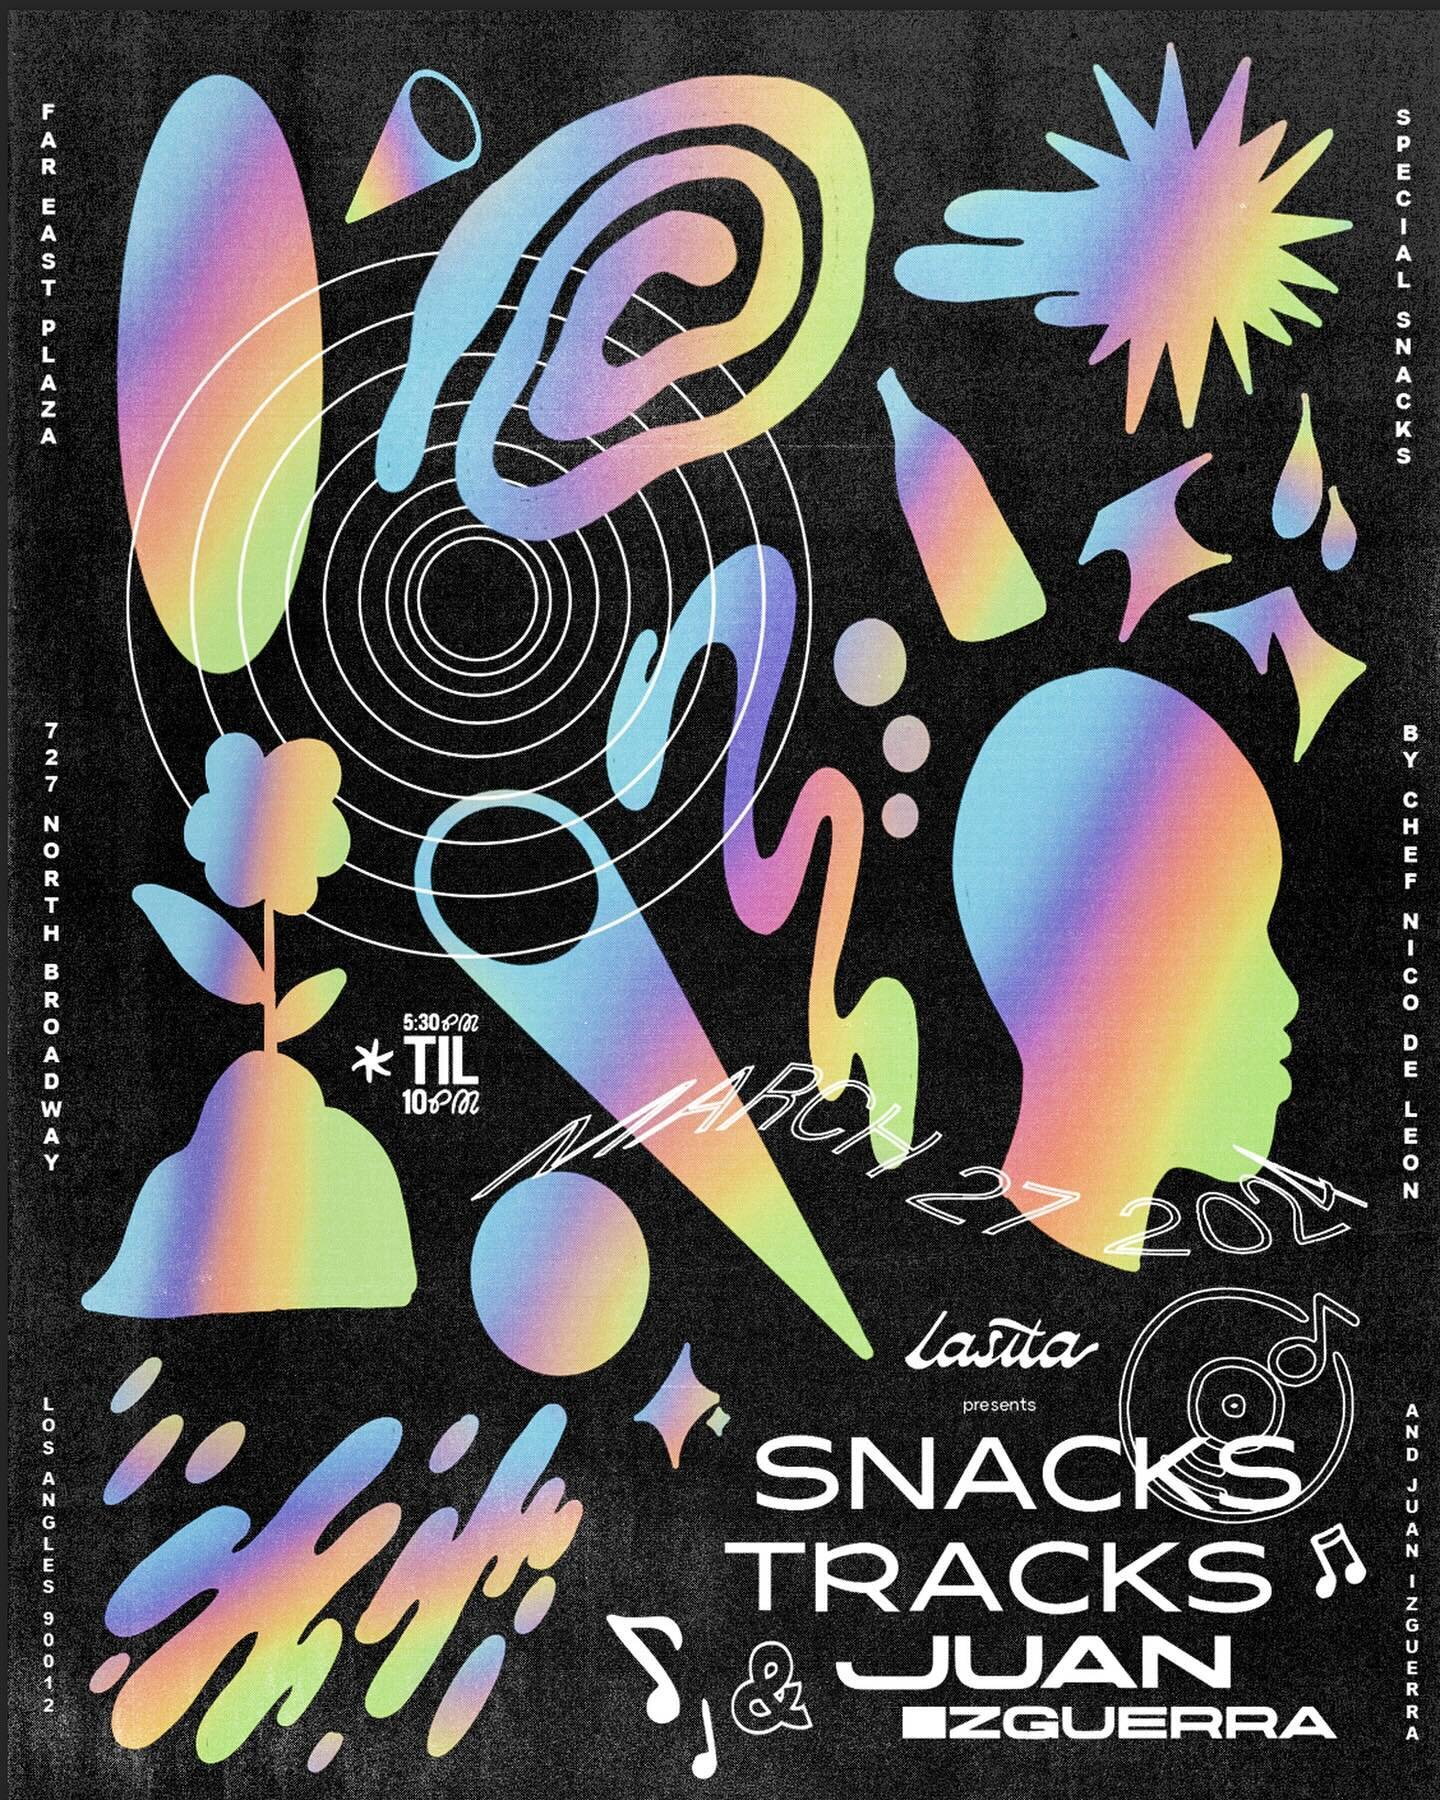 Next Wednesday, 3/27&mdash;SNACKS, TRACKS &amp; @juanizguerra!

Juan from our @homagebrewing familia will be in the house! If you already don&rsquo;t know, he is an LA based DJ who can also be heard monthly on both @dublab and @hydefmradio. His music